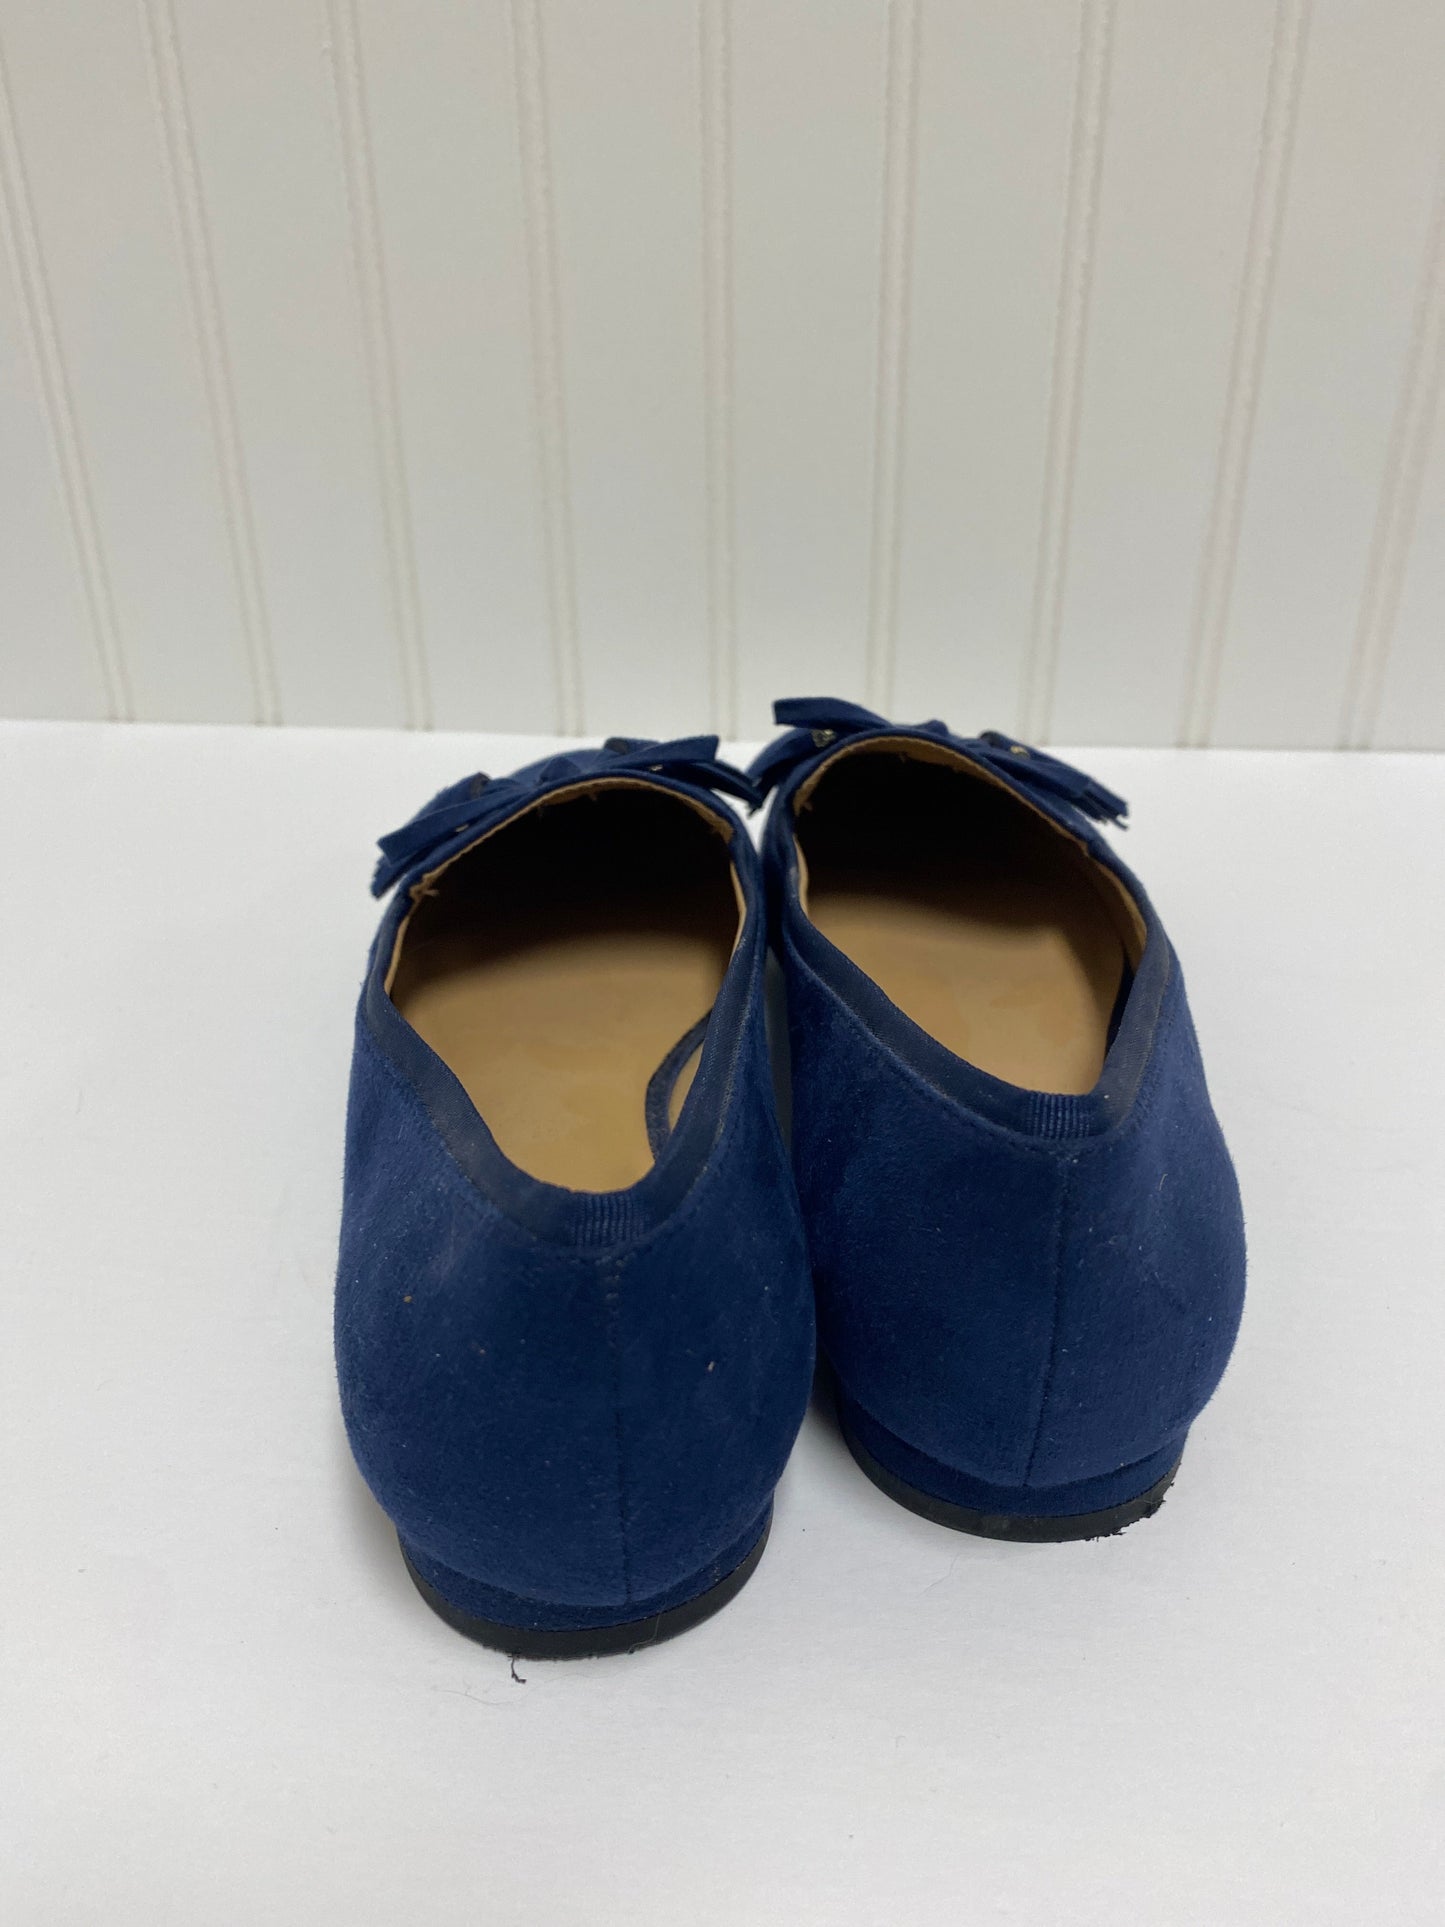 Shoes Flats By Crown And Ivy  Size: 6.5